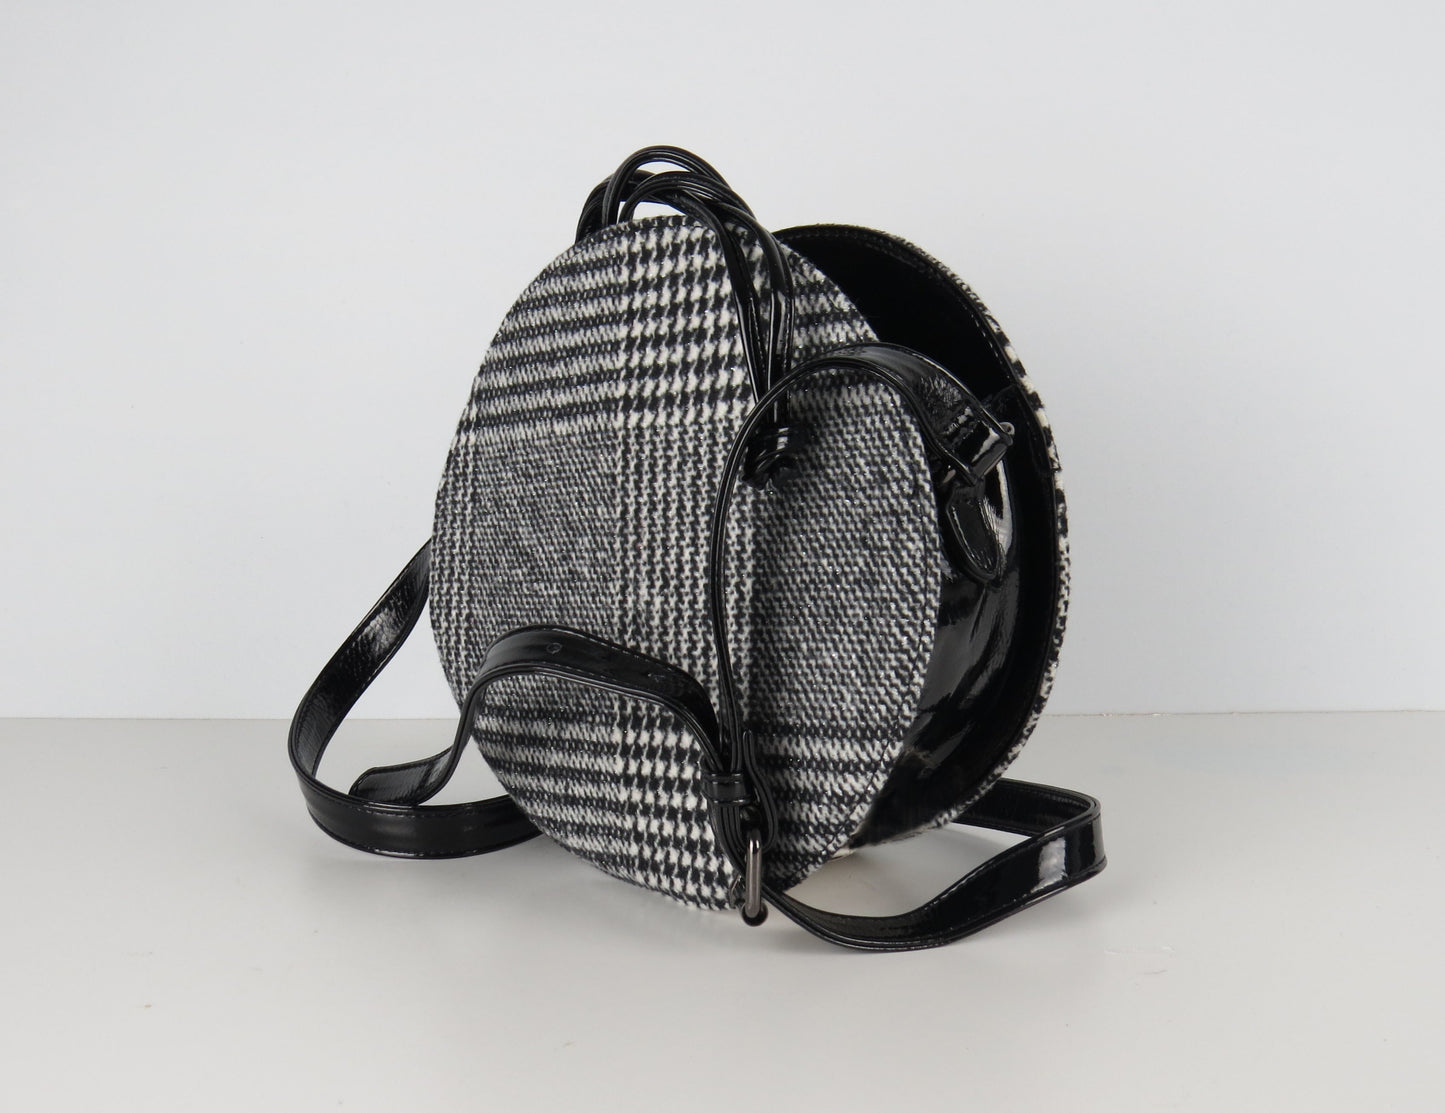 Retro styled Black And White Tweed patterned Round Crossbody bag